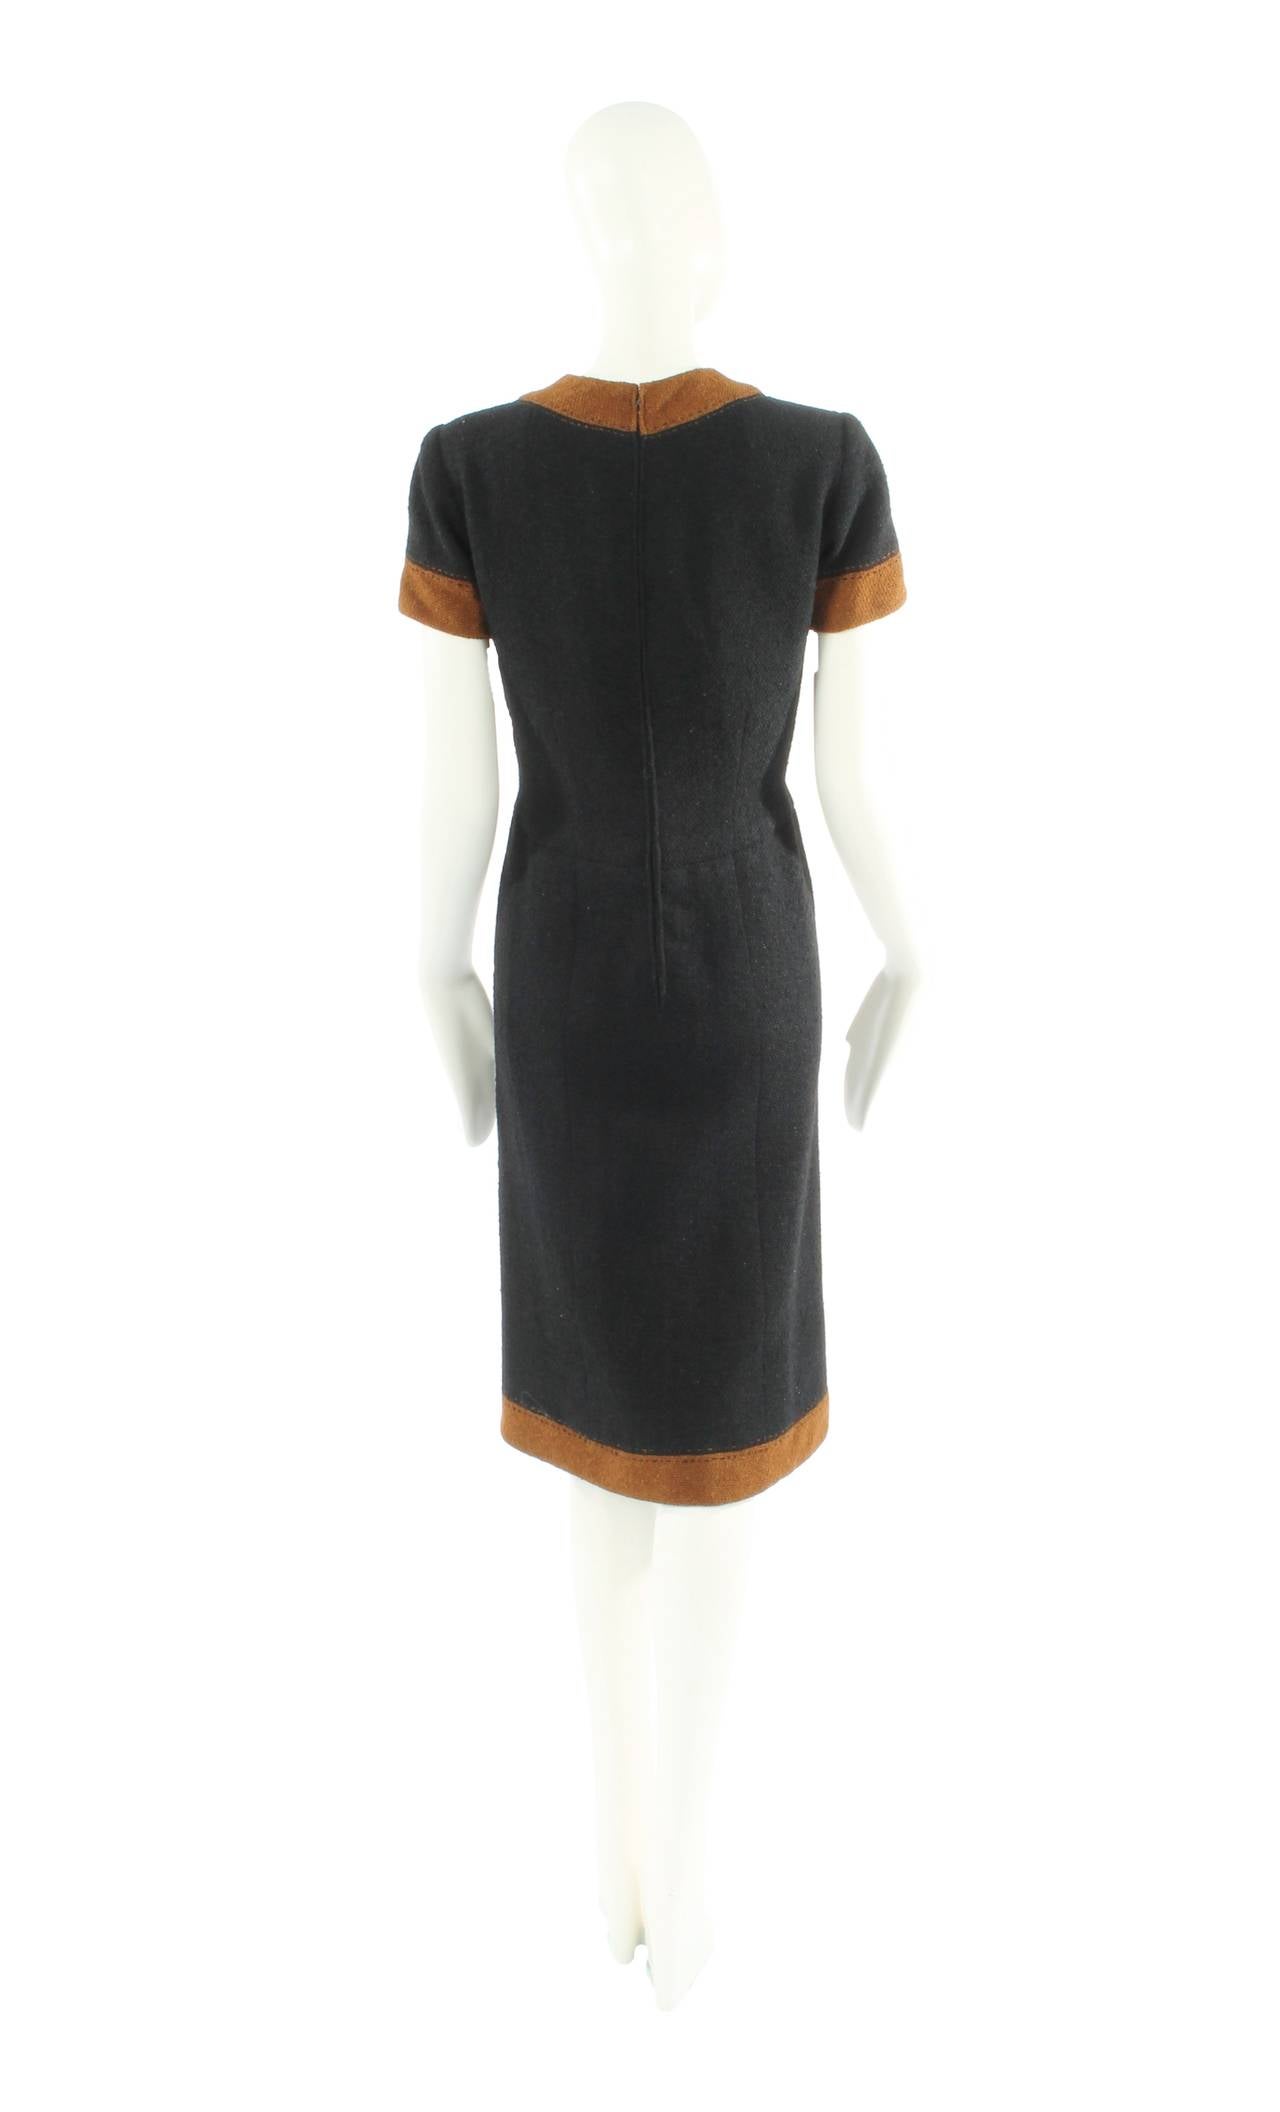 A wonderful haute couture dress by Pierre Balmain, the dress is an eminently wearable item of clothing by one of the greatest couturiers of the 20th century. Crafted in a solid black wool boucle, the dress is edged in tobacco-coloured wool boucle